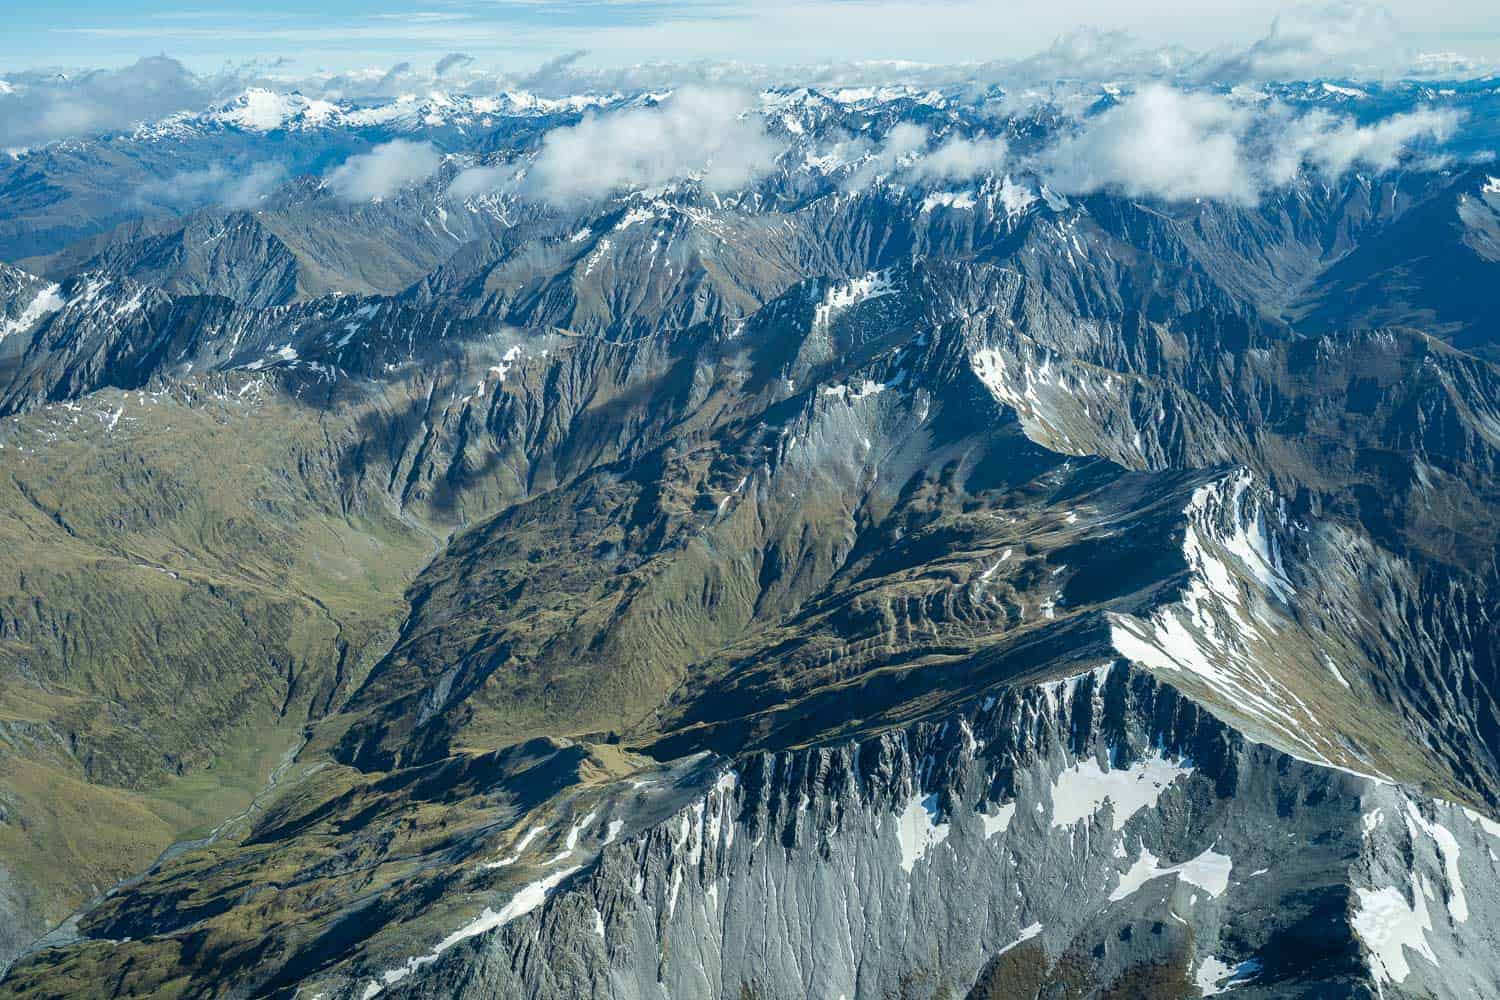 View of Southern Alps near Queenstown on a scenic flight to Milford Sound